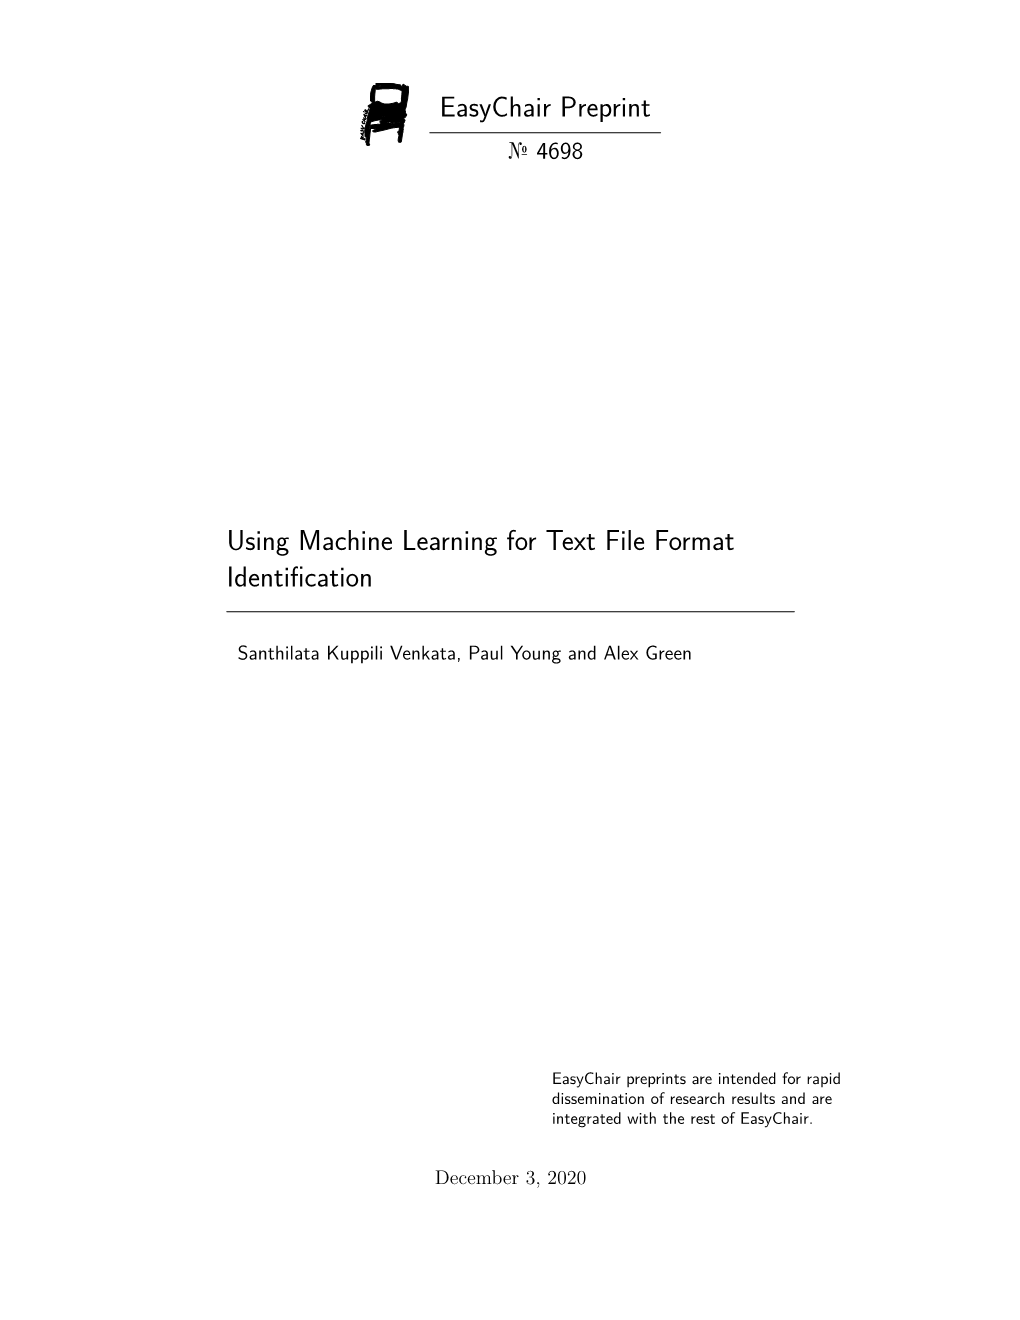 Using Machine Learning for Text File Format Identification